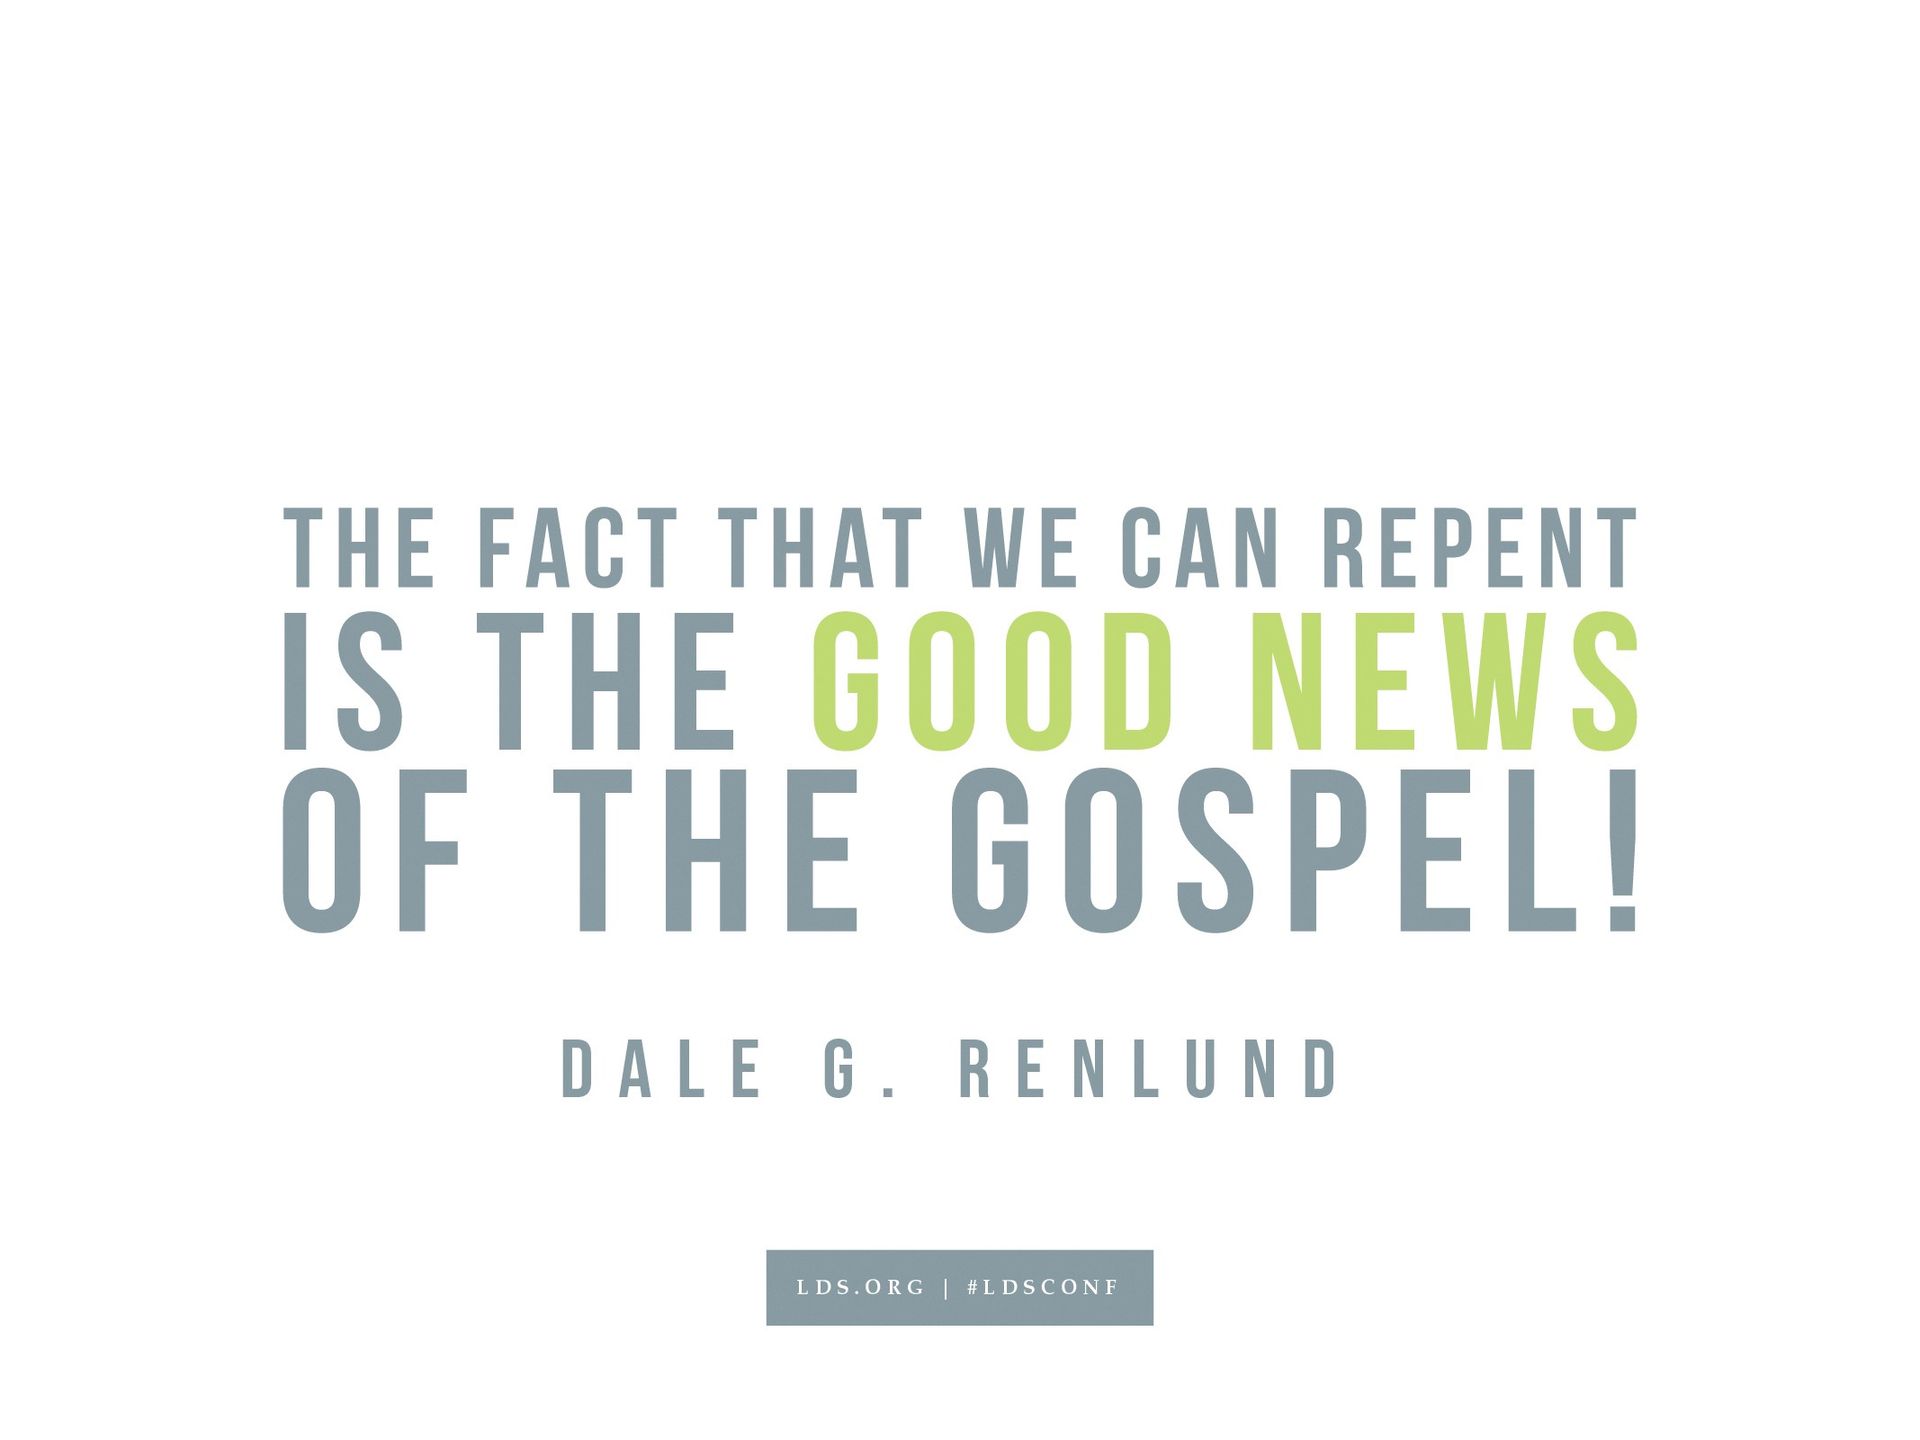 “The fact that we can repent is the good news of the gospel!”—Dale G. Renlund, “Repentance: A Joyful Choice”